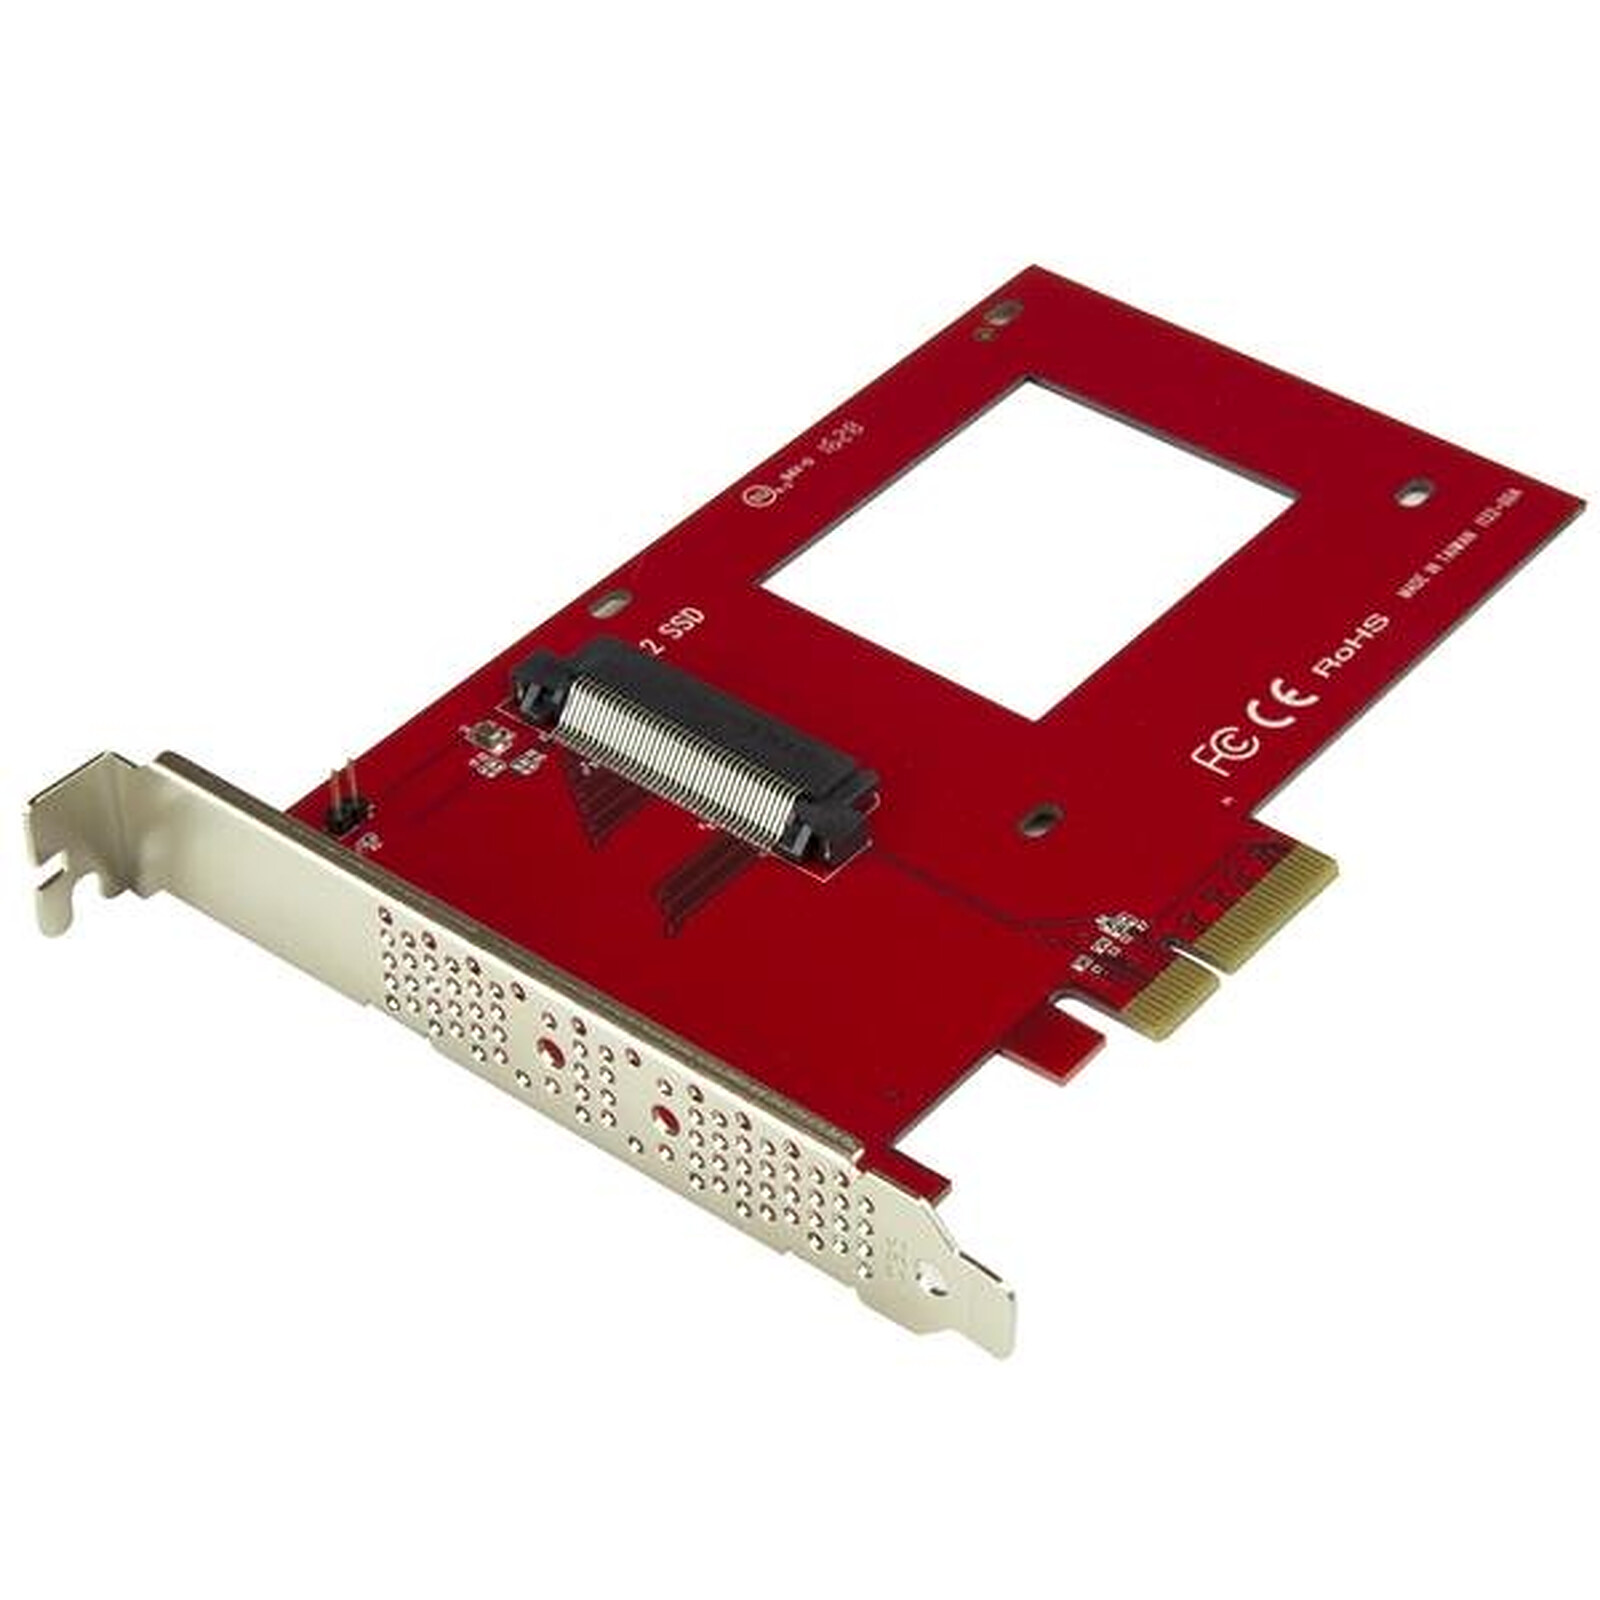 U.2 to M.2 Adapter for M.2 PCIe NVMe SSD, SFF-8639